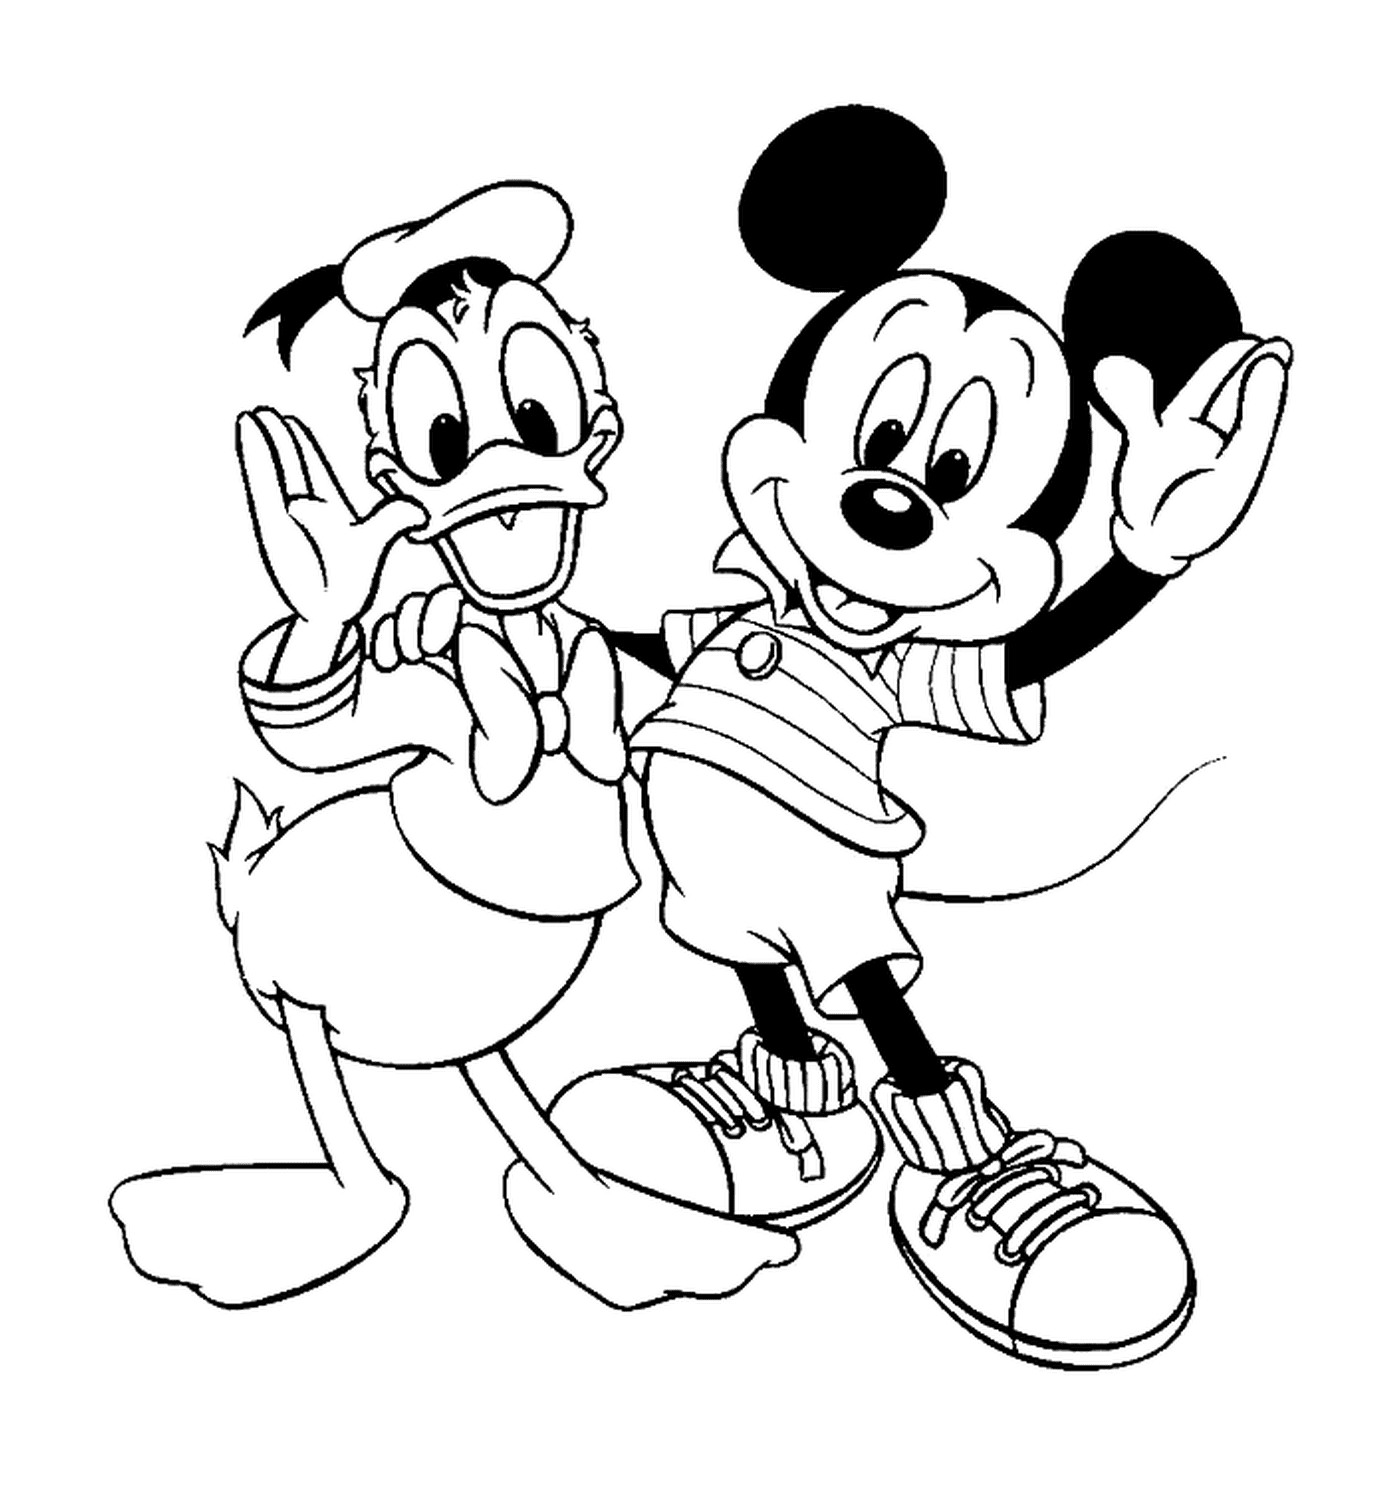  Drawing by Mickey and his friend Donald: Mickey Mouse and Donald Duck 